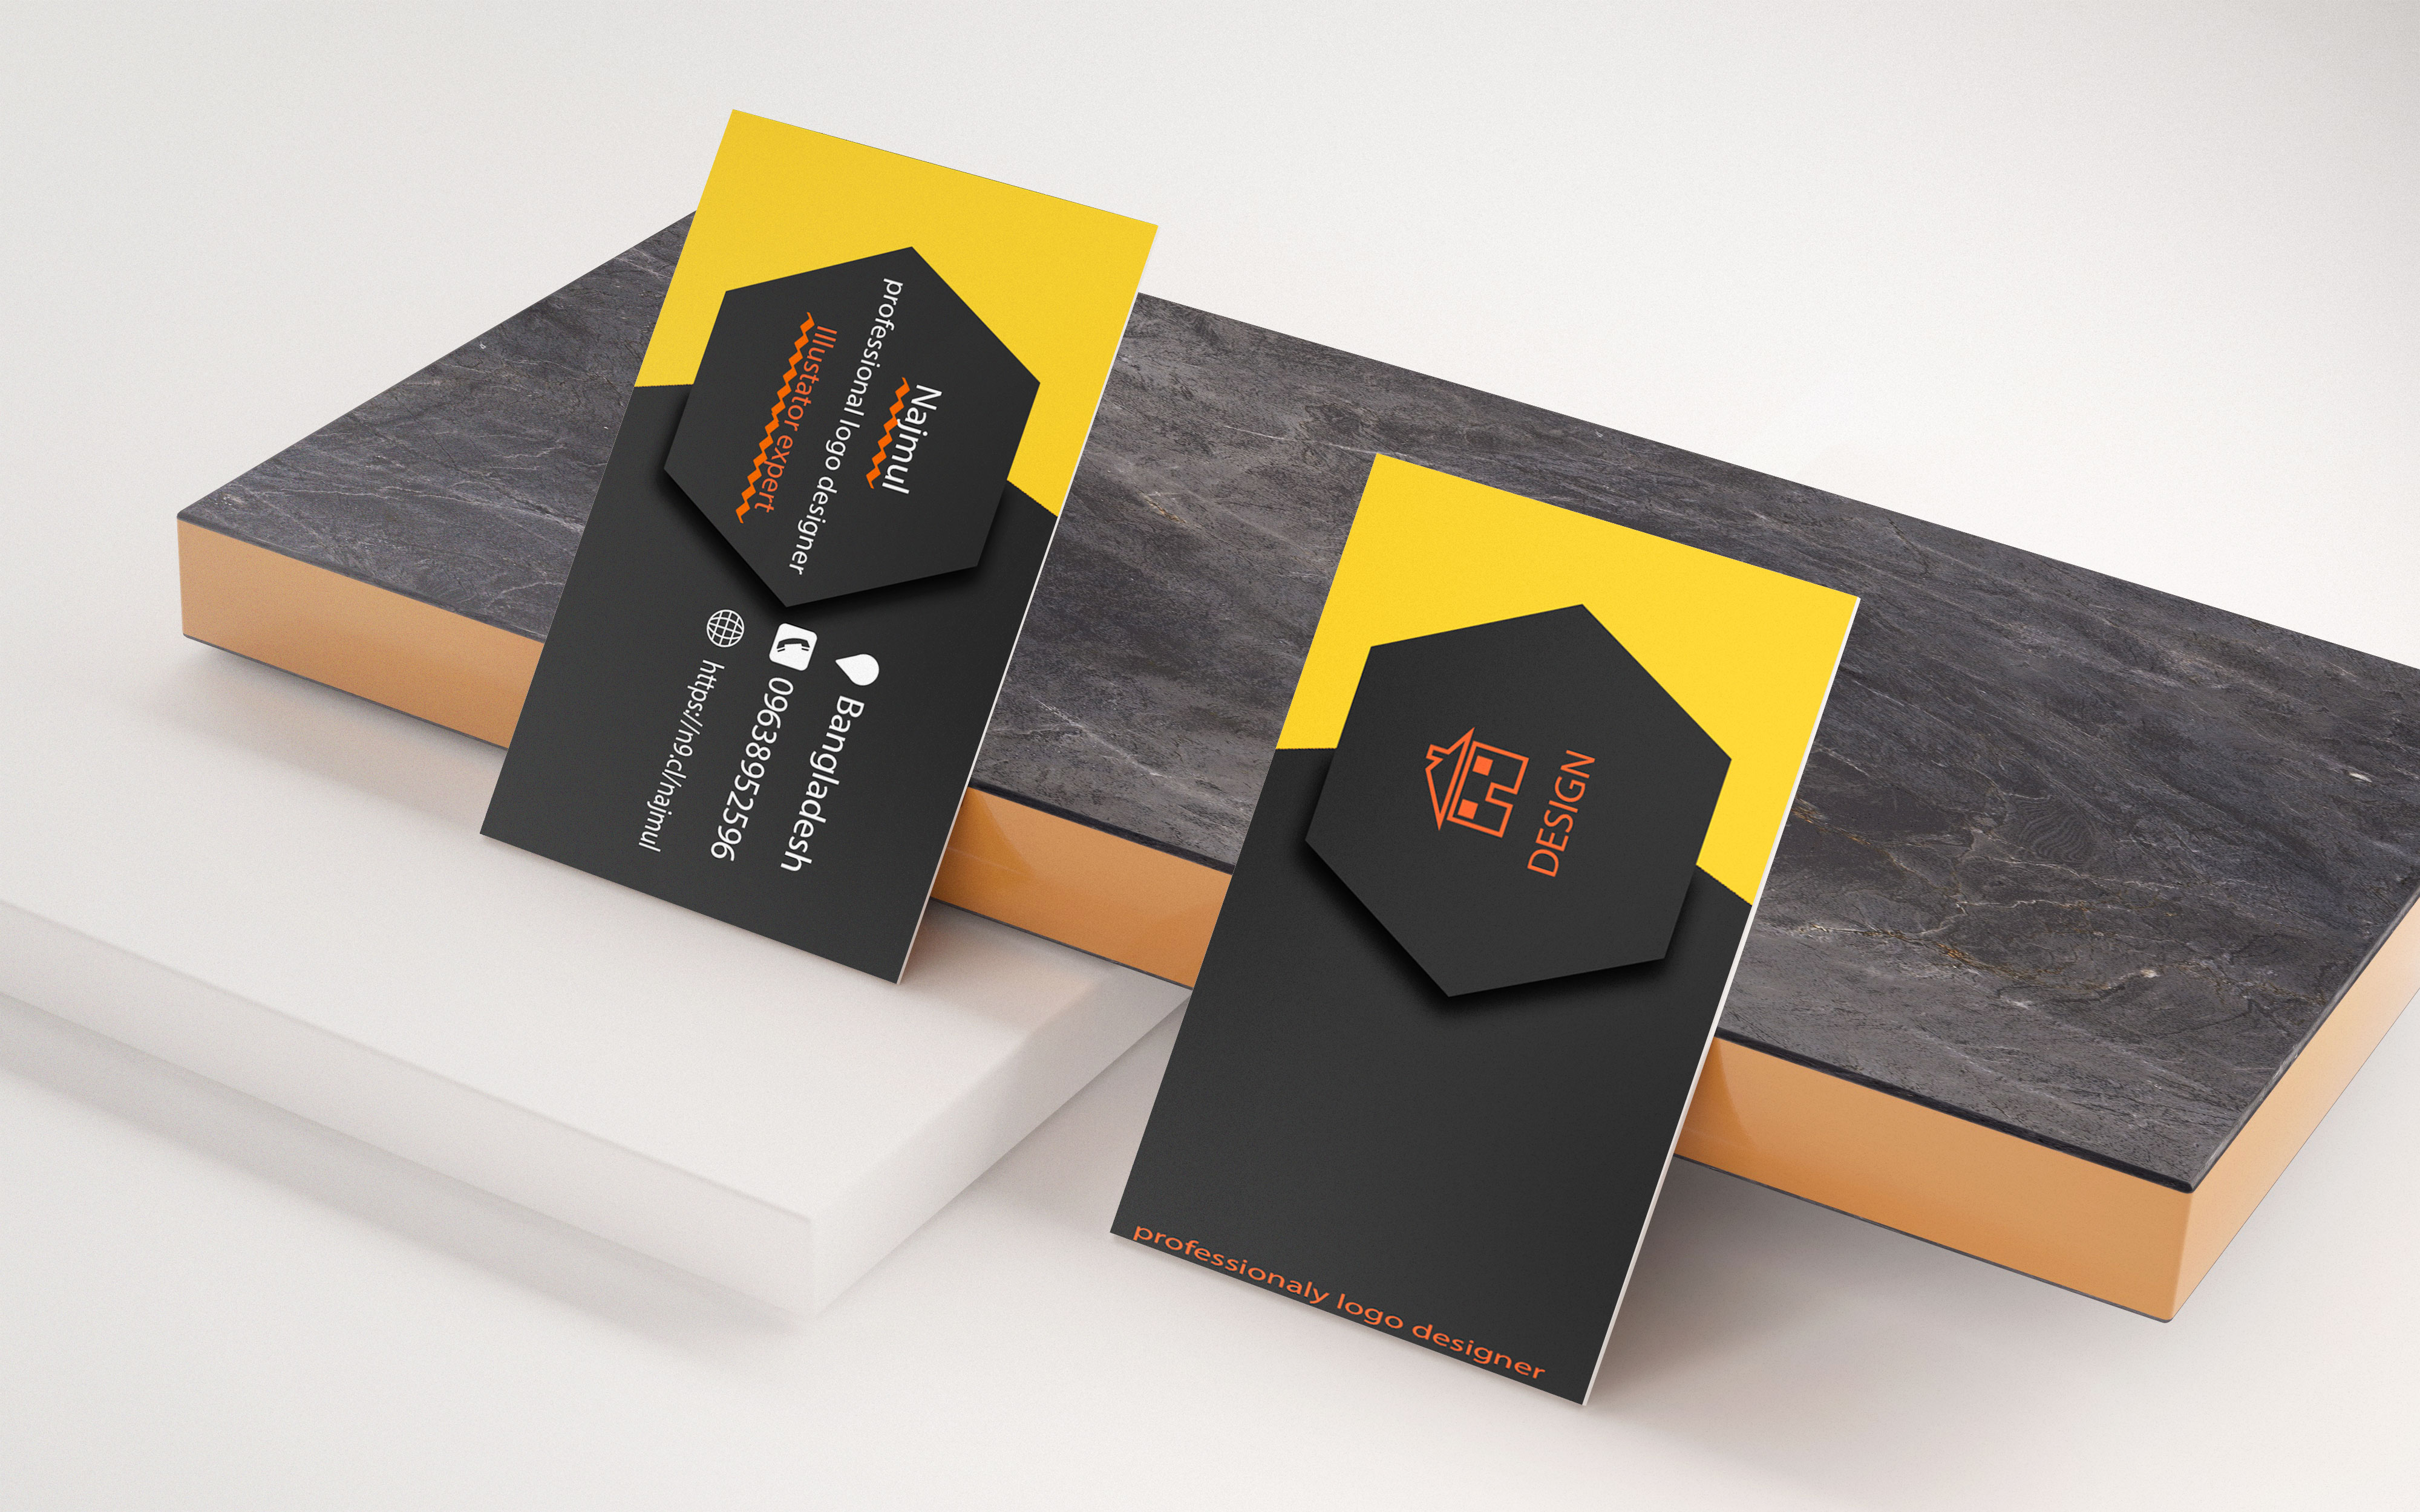 Remodeling Logos For Business Cards